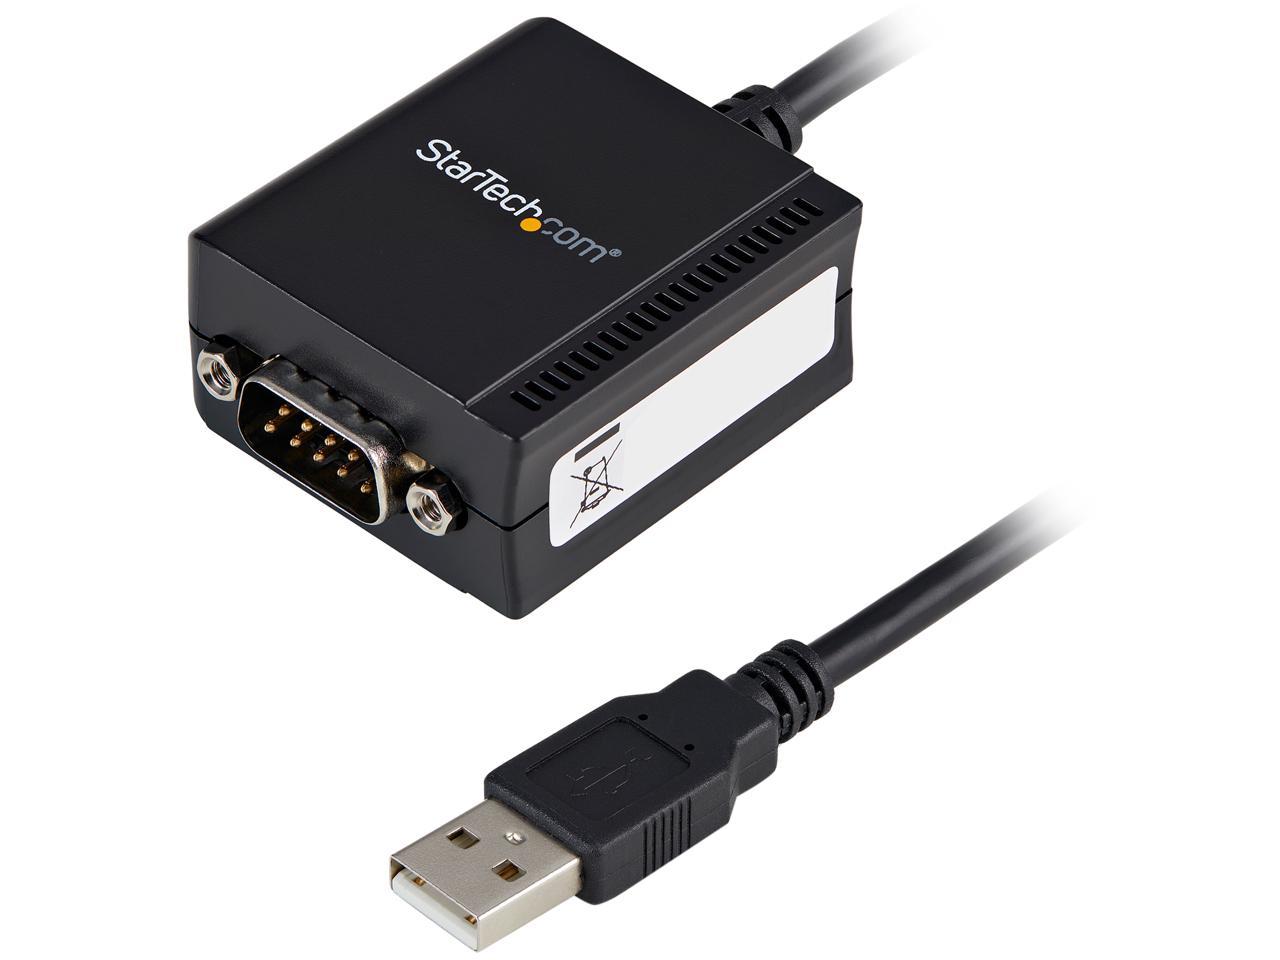 StarTech.com USB to Serial Adapter - 1 port - USB Powered - FTDI USB UART Chip - DB9 (9-pin) - USB to RS232 Adapter - image 1 of 5